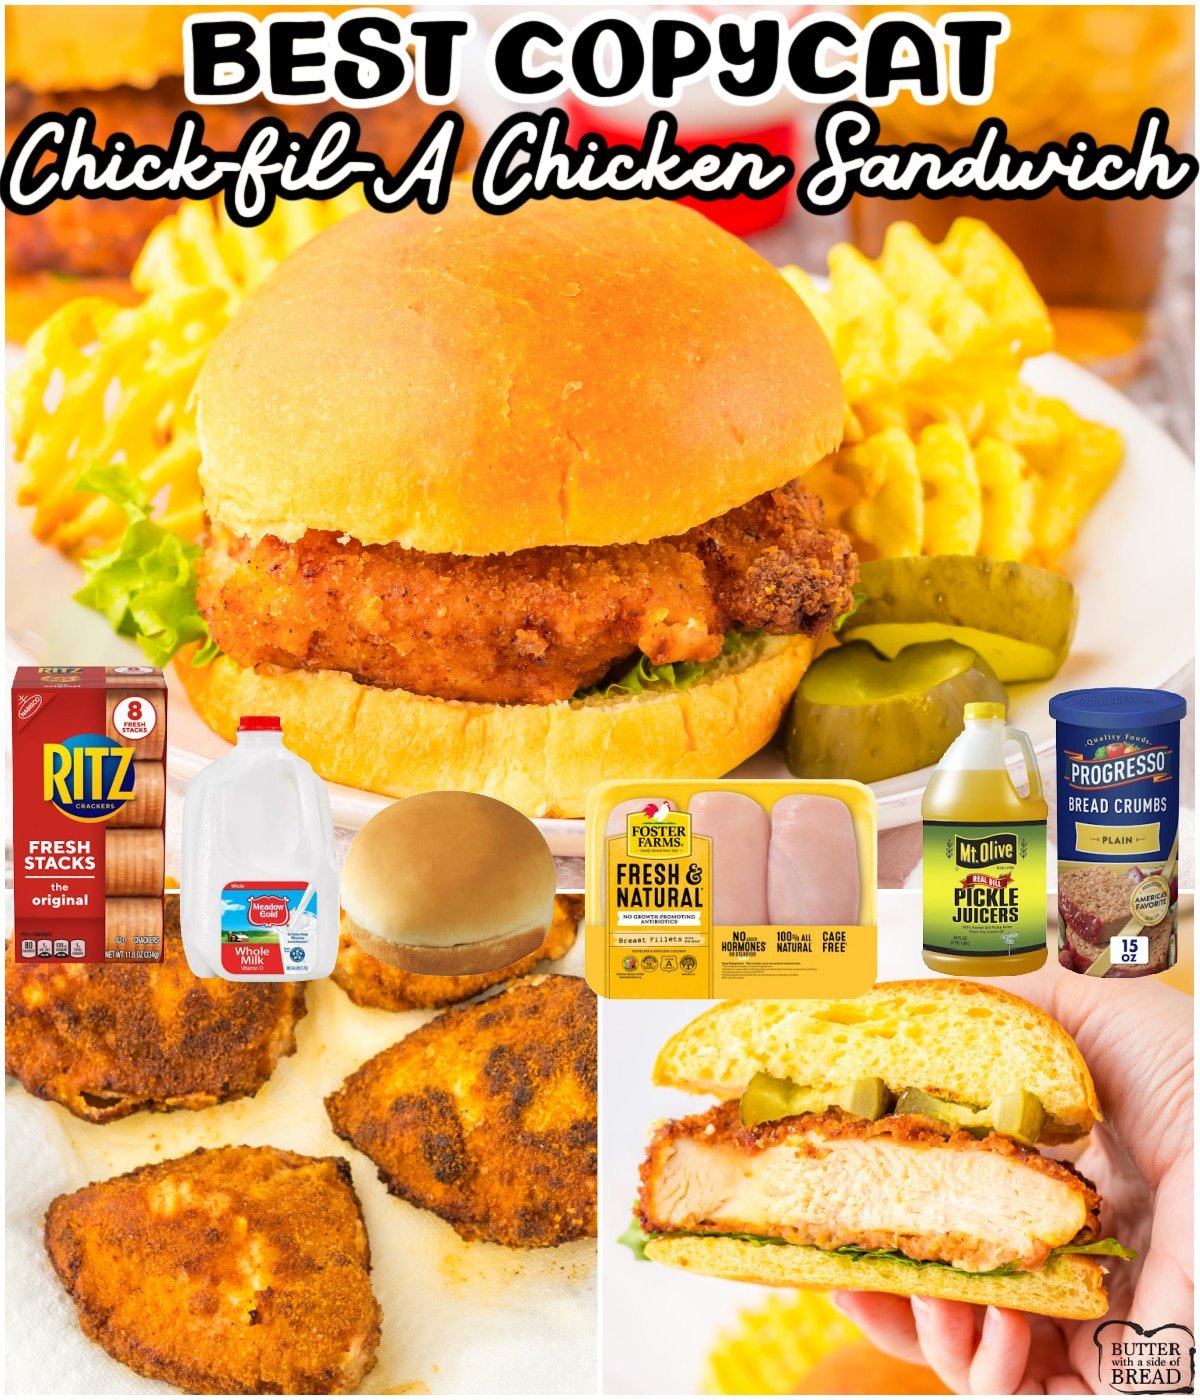 Copycat Chick-fil-A Sandwiches made with 4 secret ingredients that make them taste just like the original!! Tender, flavorful chicken cutlets breaded and fried, then made into the best crispy chicken sandwich ever!